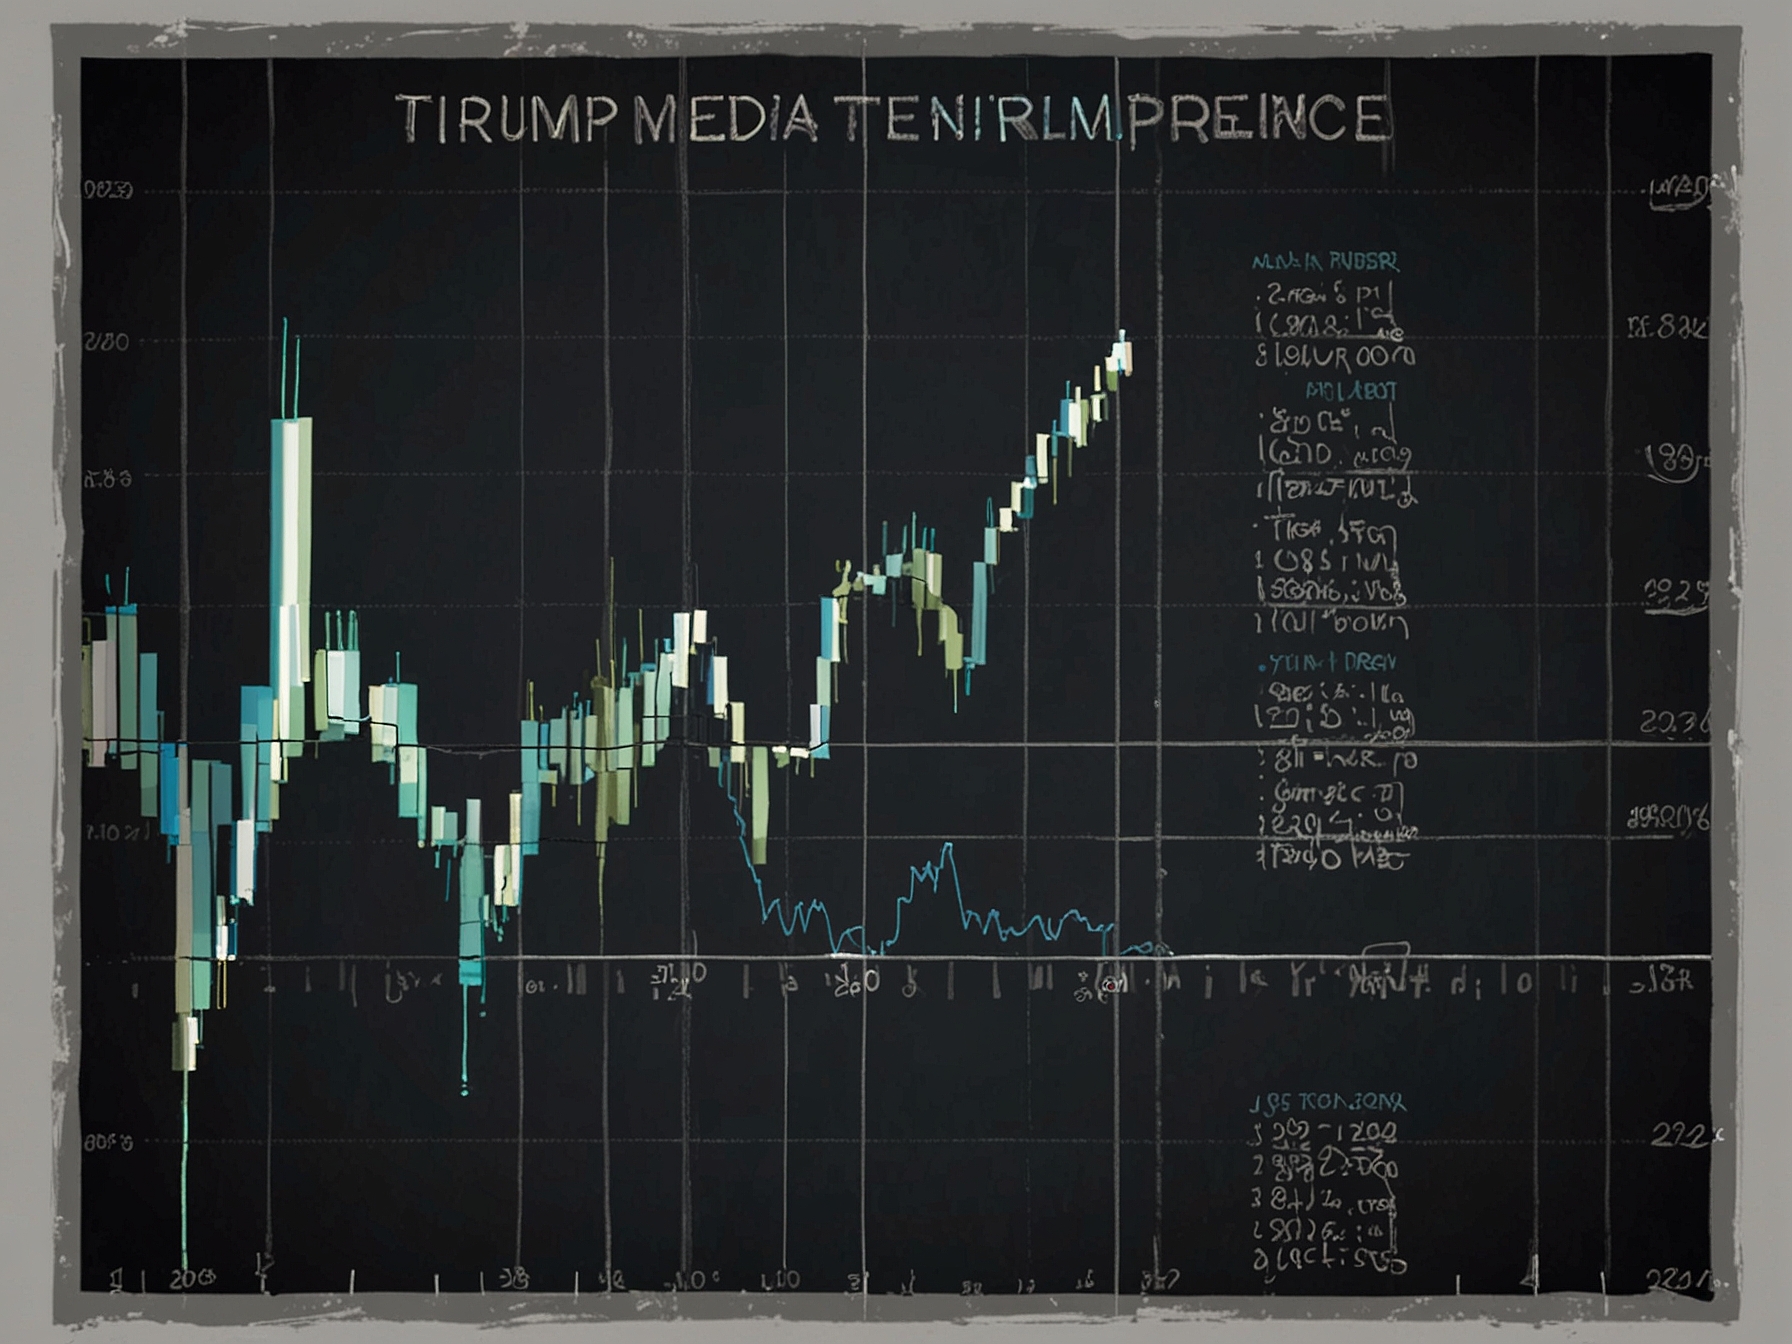 A graph showing the rising stock prices of Trump Media & Technology, reflecting increased investor confidence following the first U.S. presidential debate.